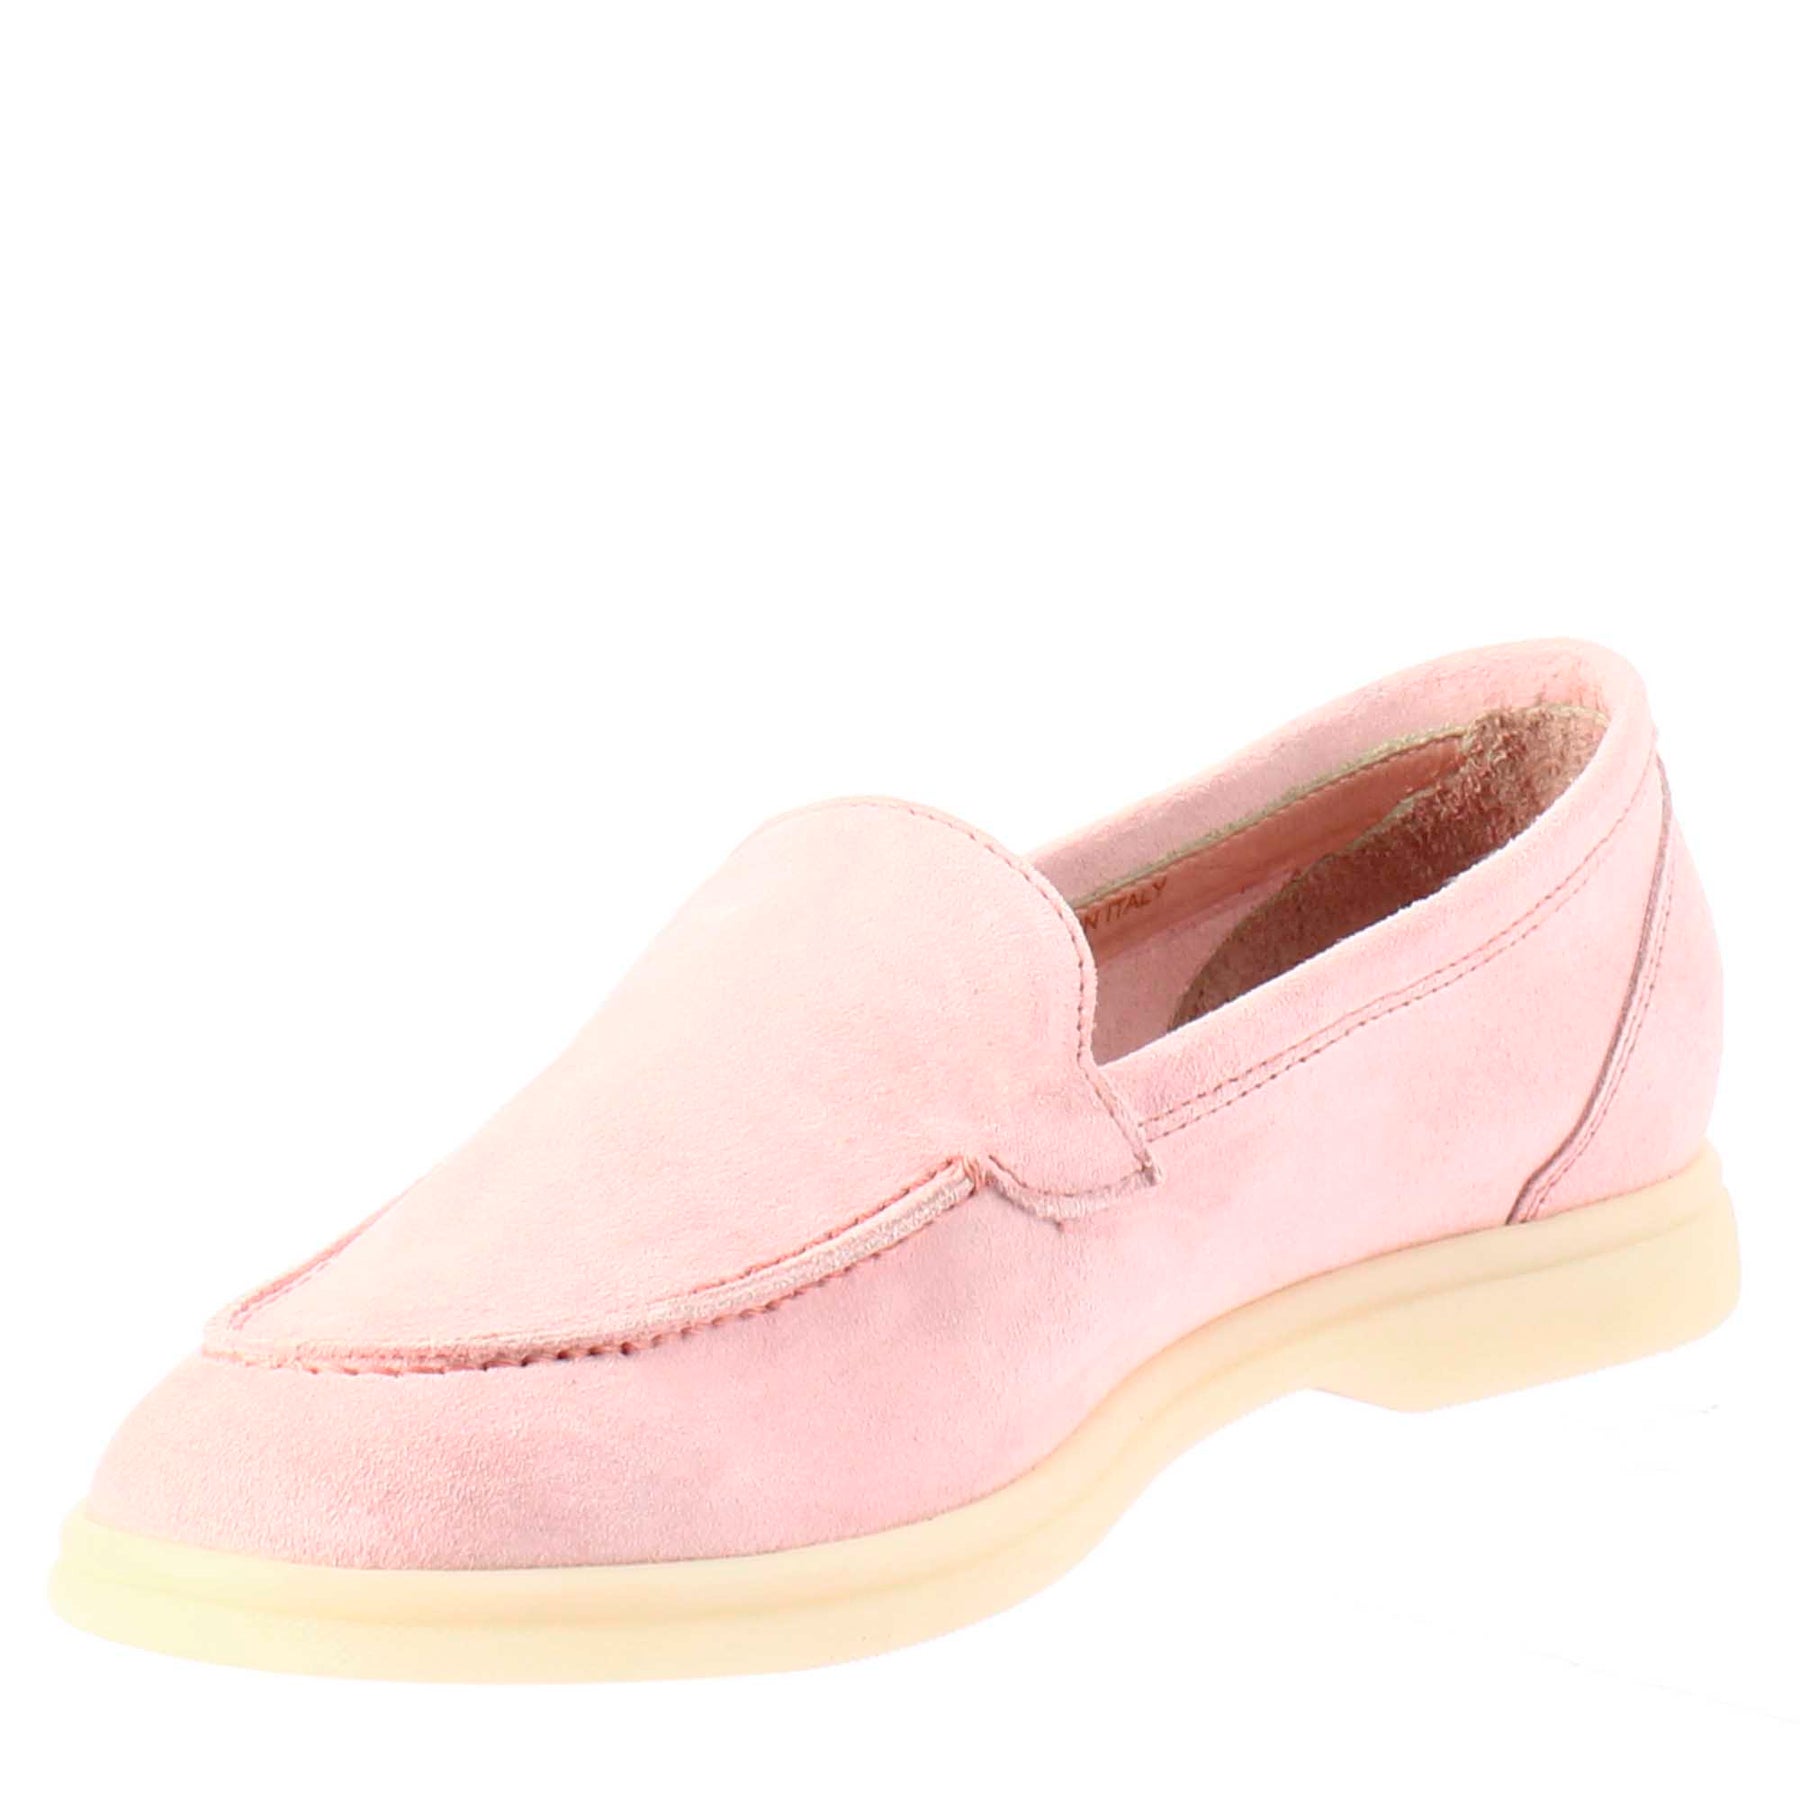 Women's flexible moccasin in pink suede leather